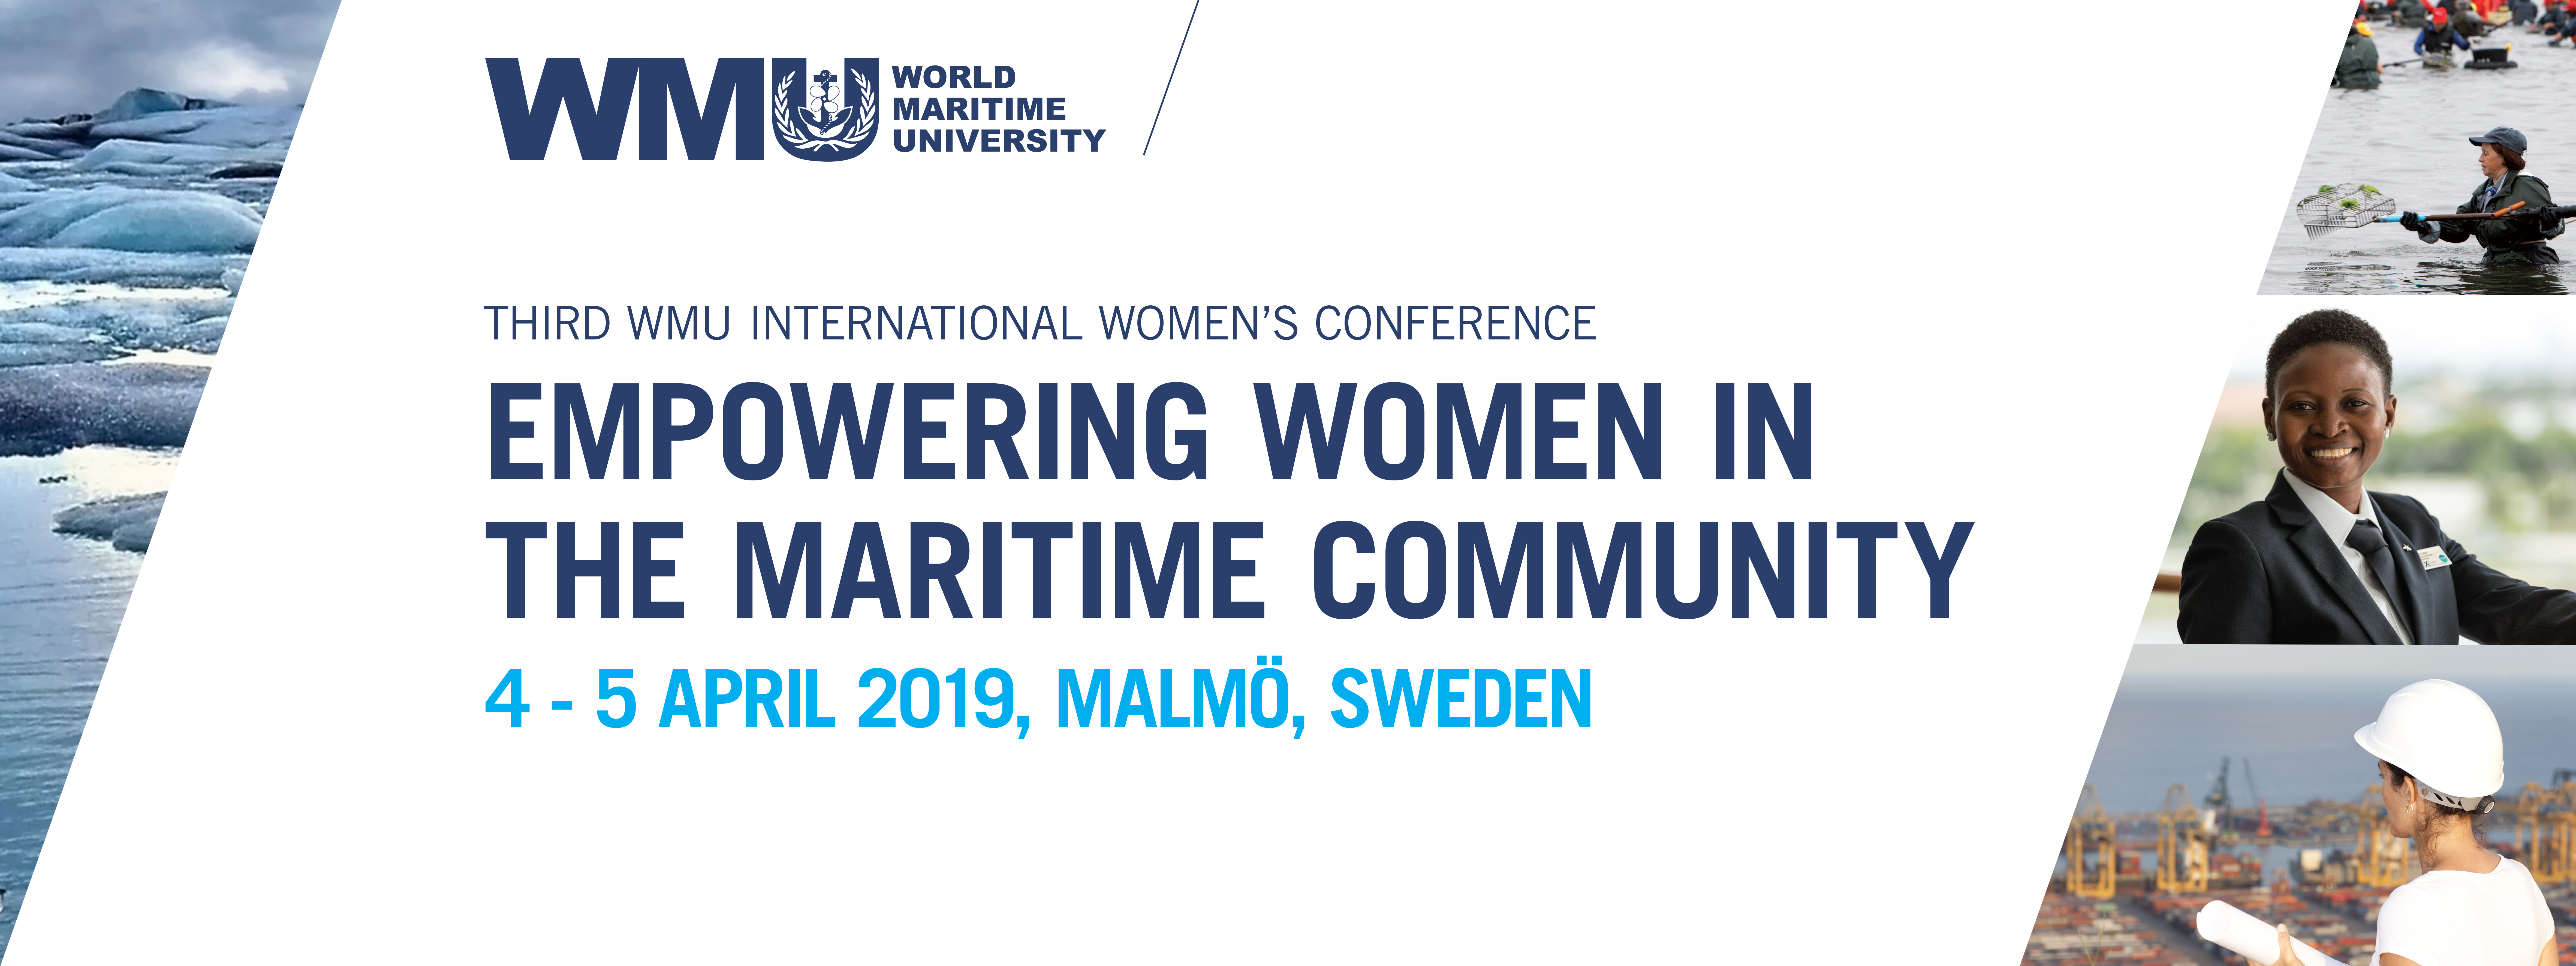 Empowering Women in the Maritime Community